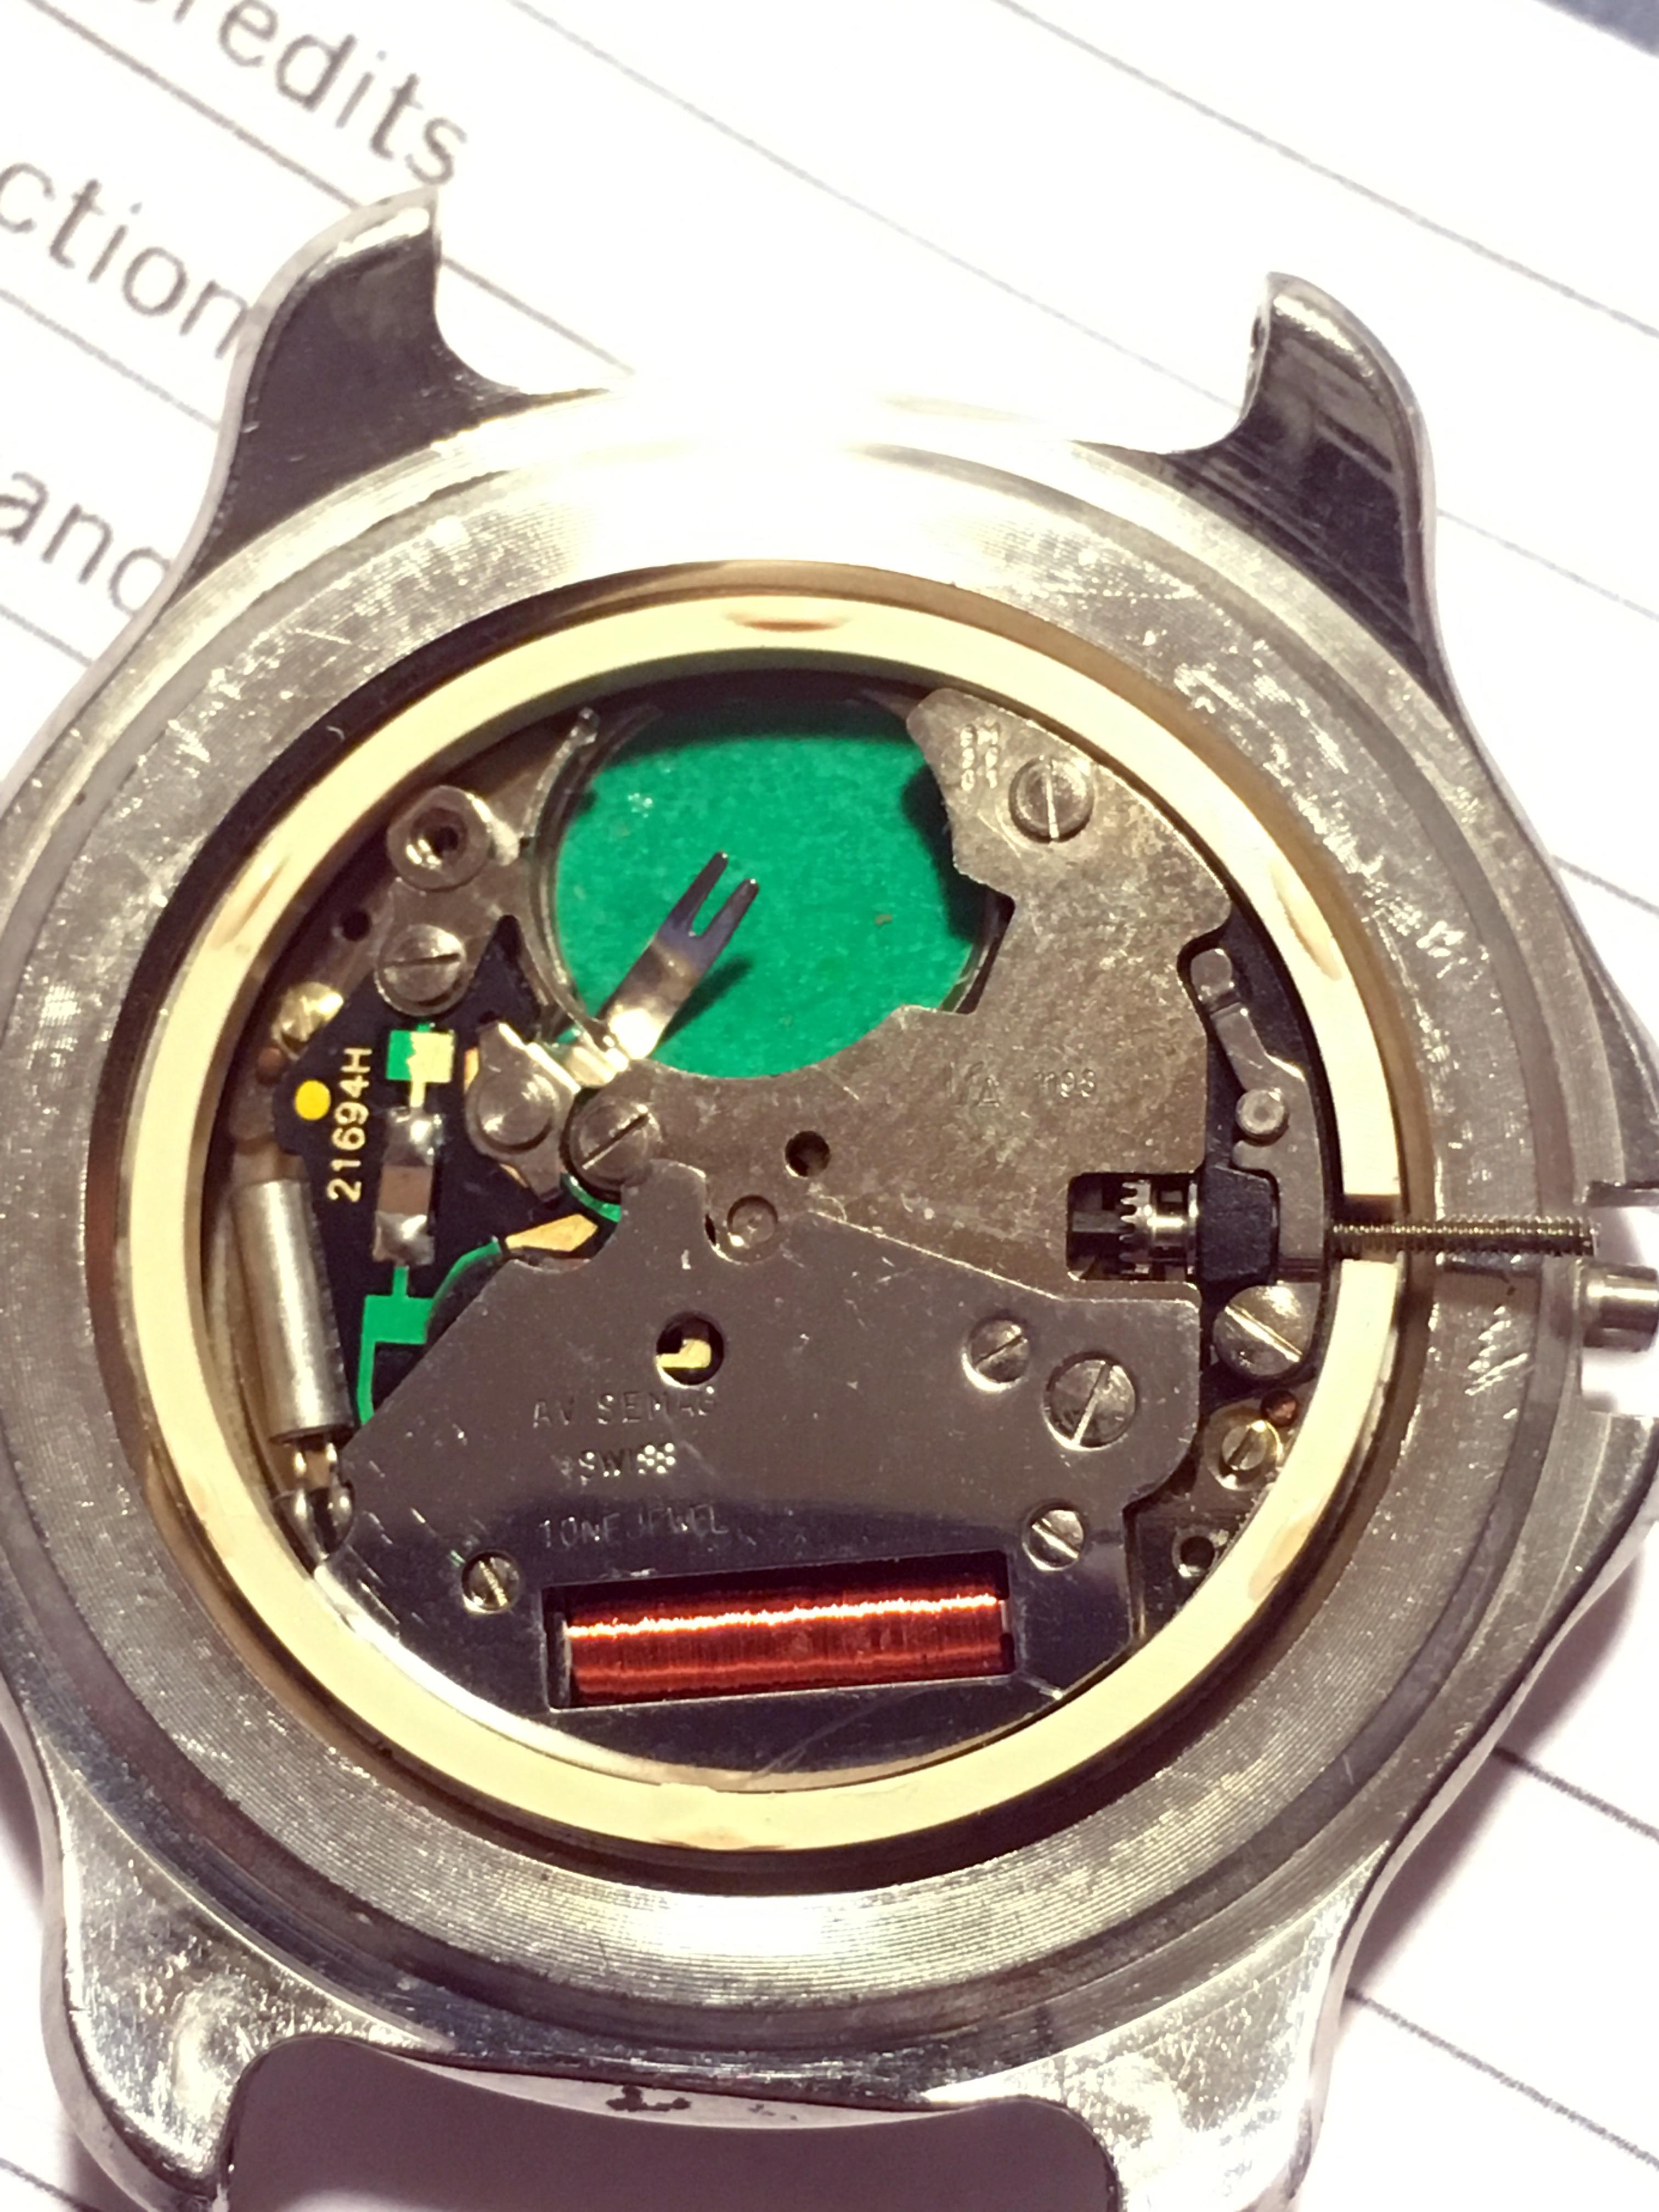 Stem removal on a Swiss army watch - Watch Repairs Help & Advice - Watch  Repair Talk